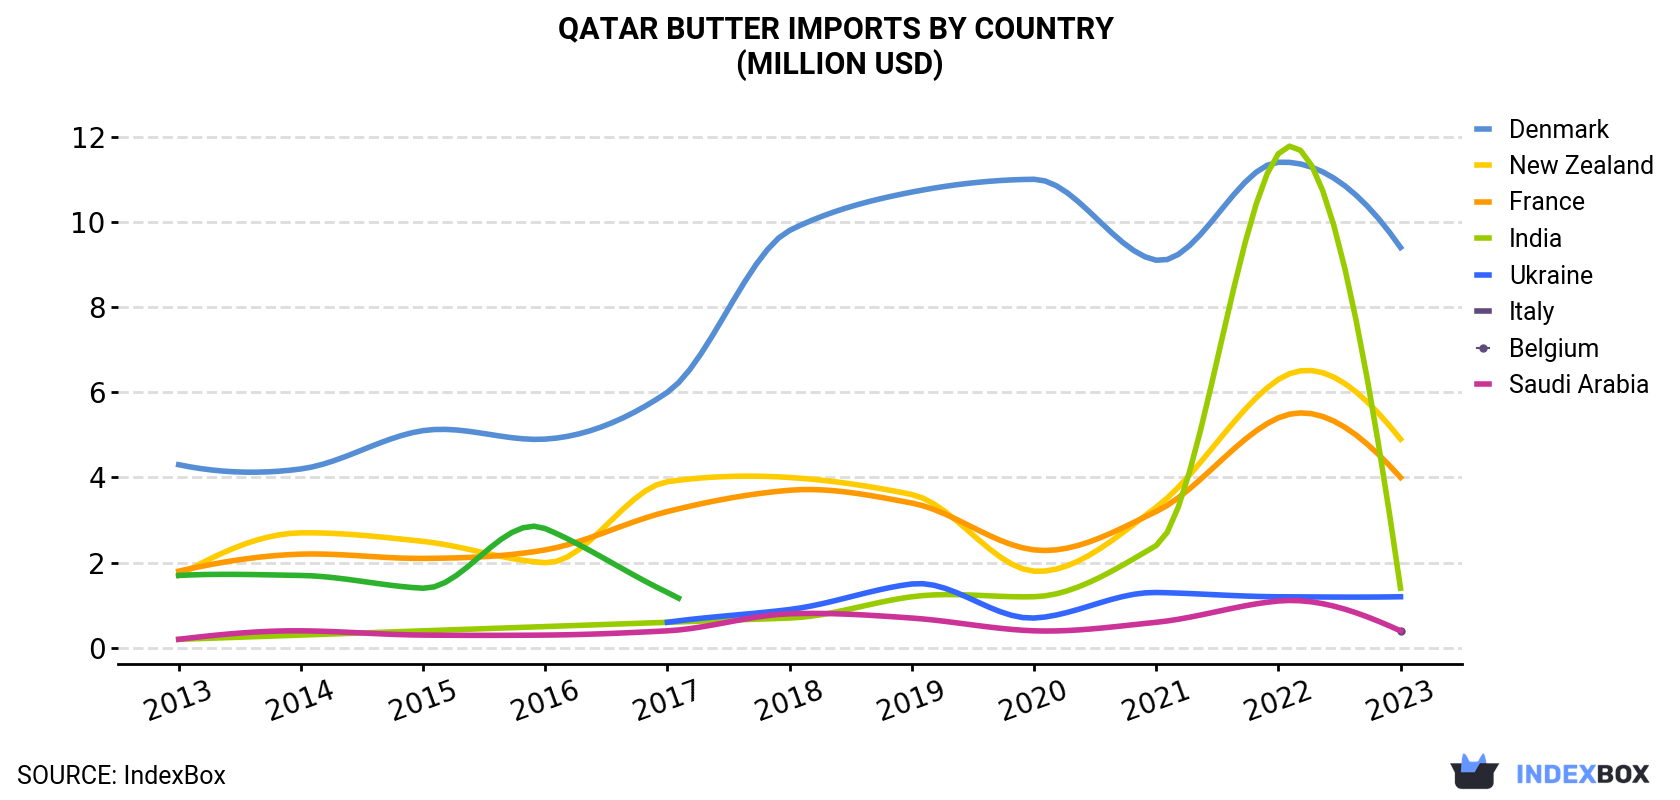 Qatar Butter Imports By Country (Million USD)